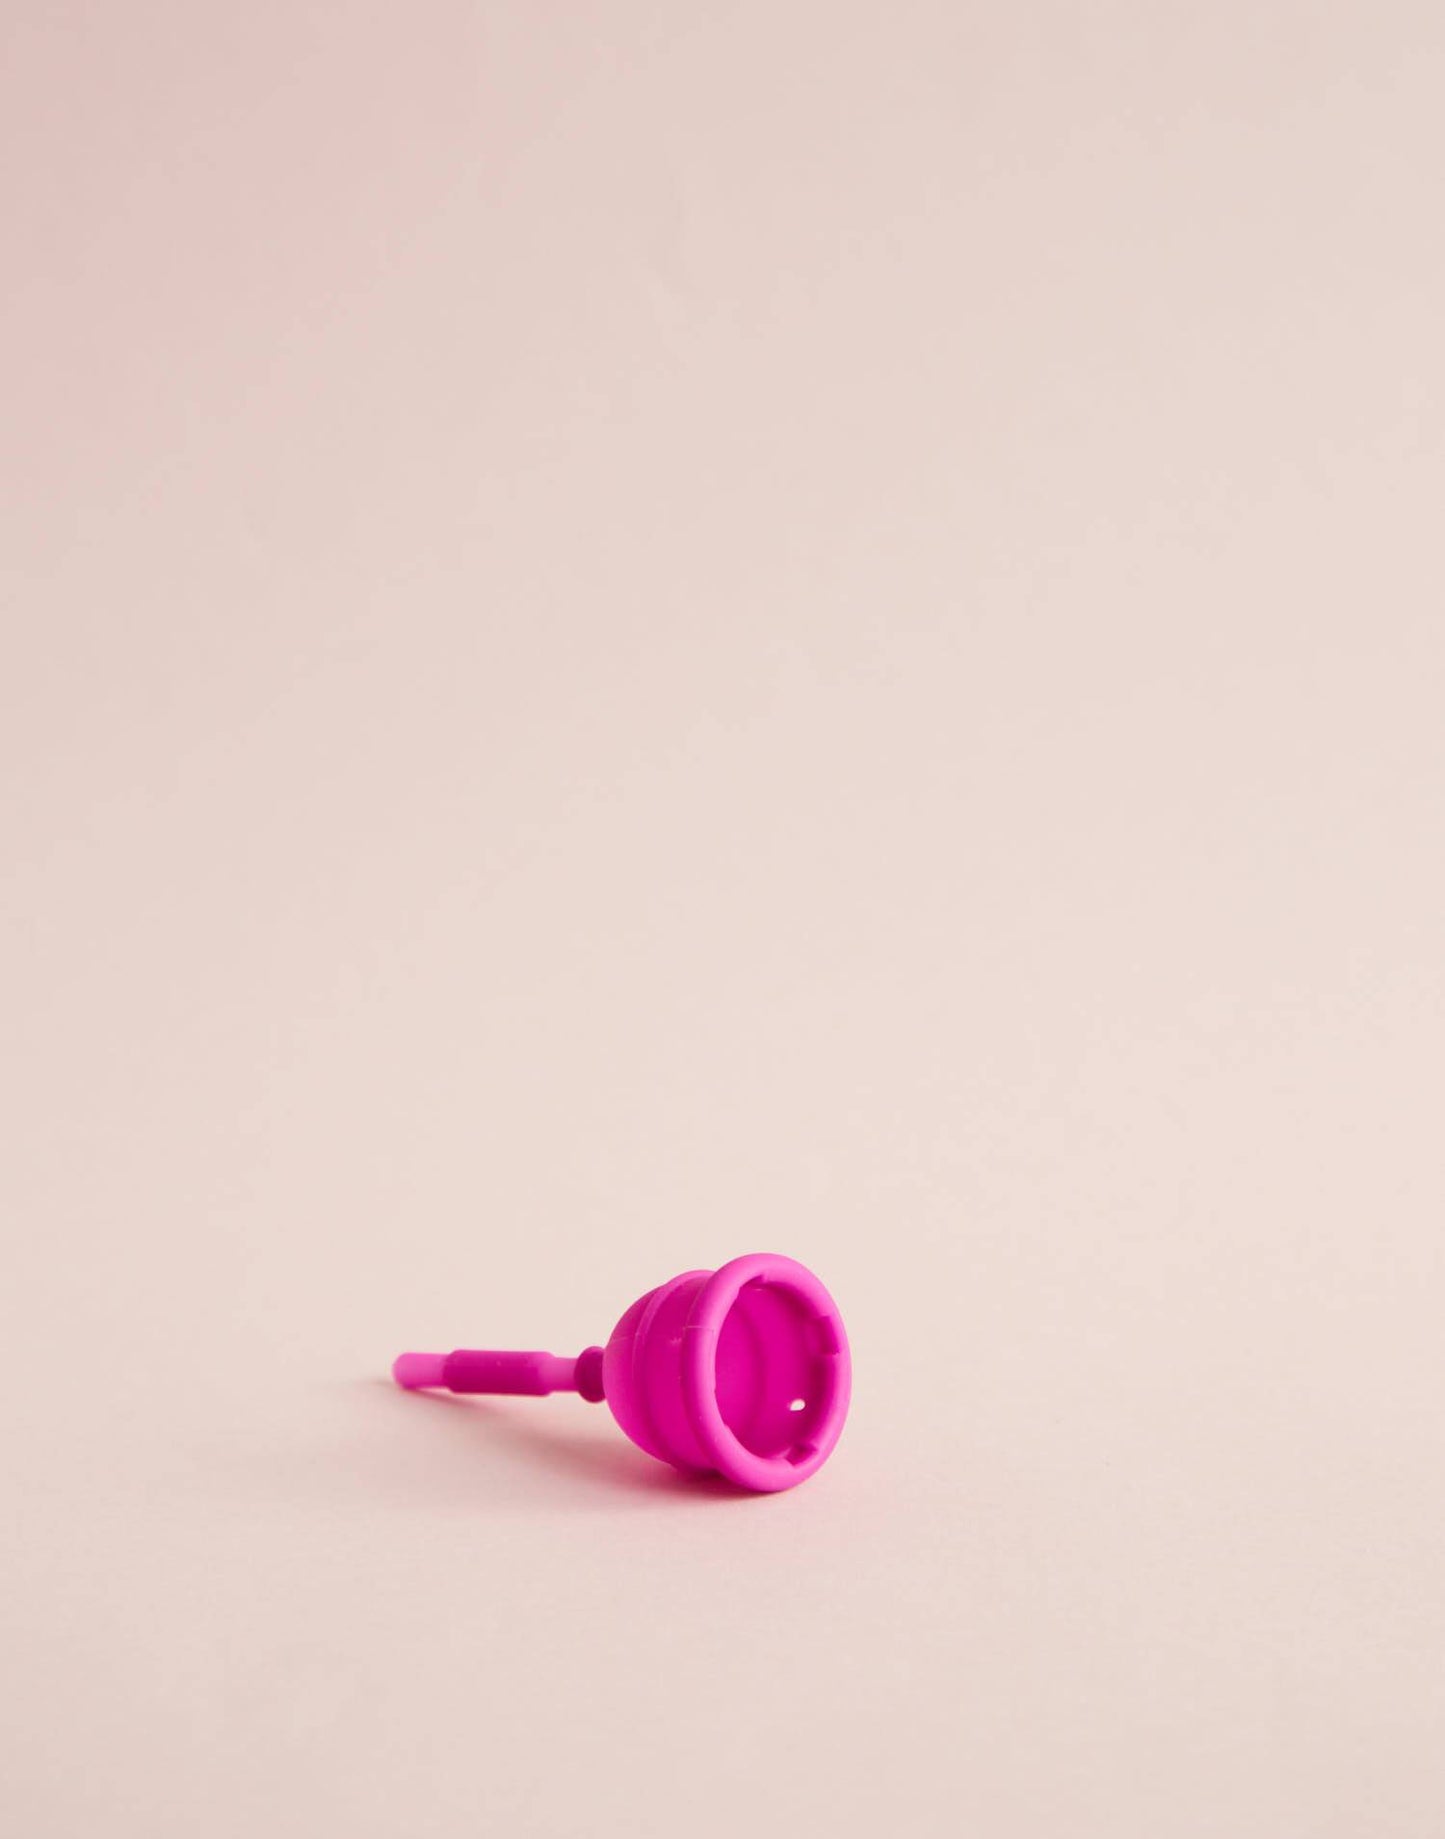 Soft menstrual cup by eureka